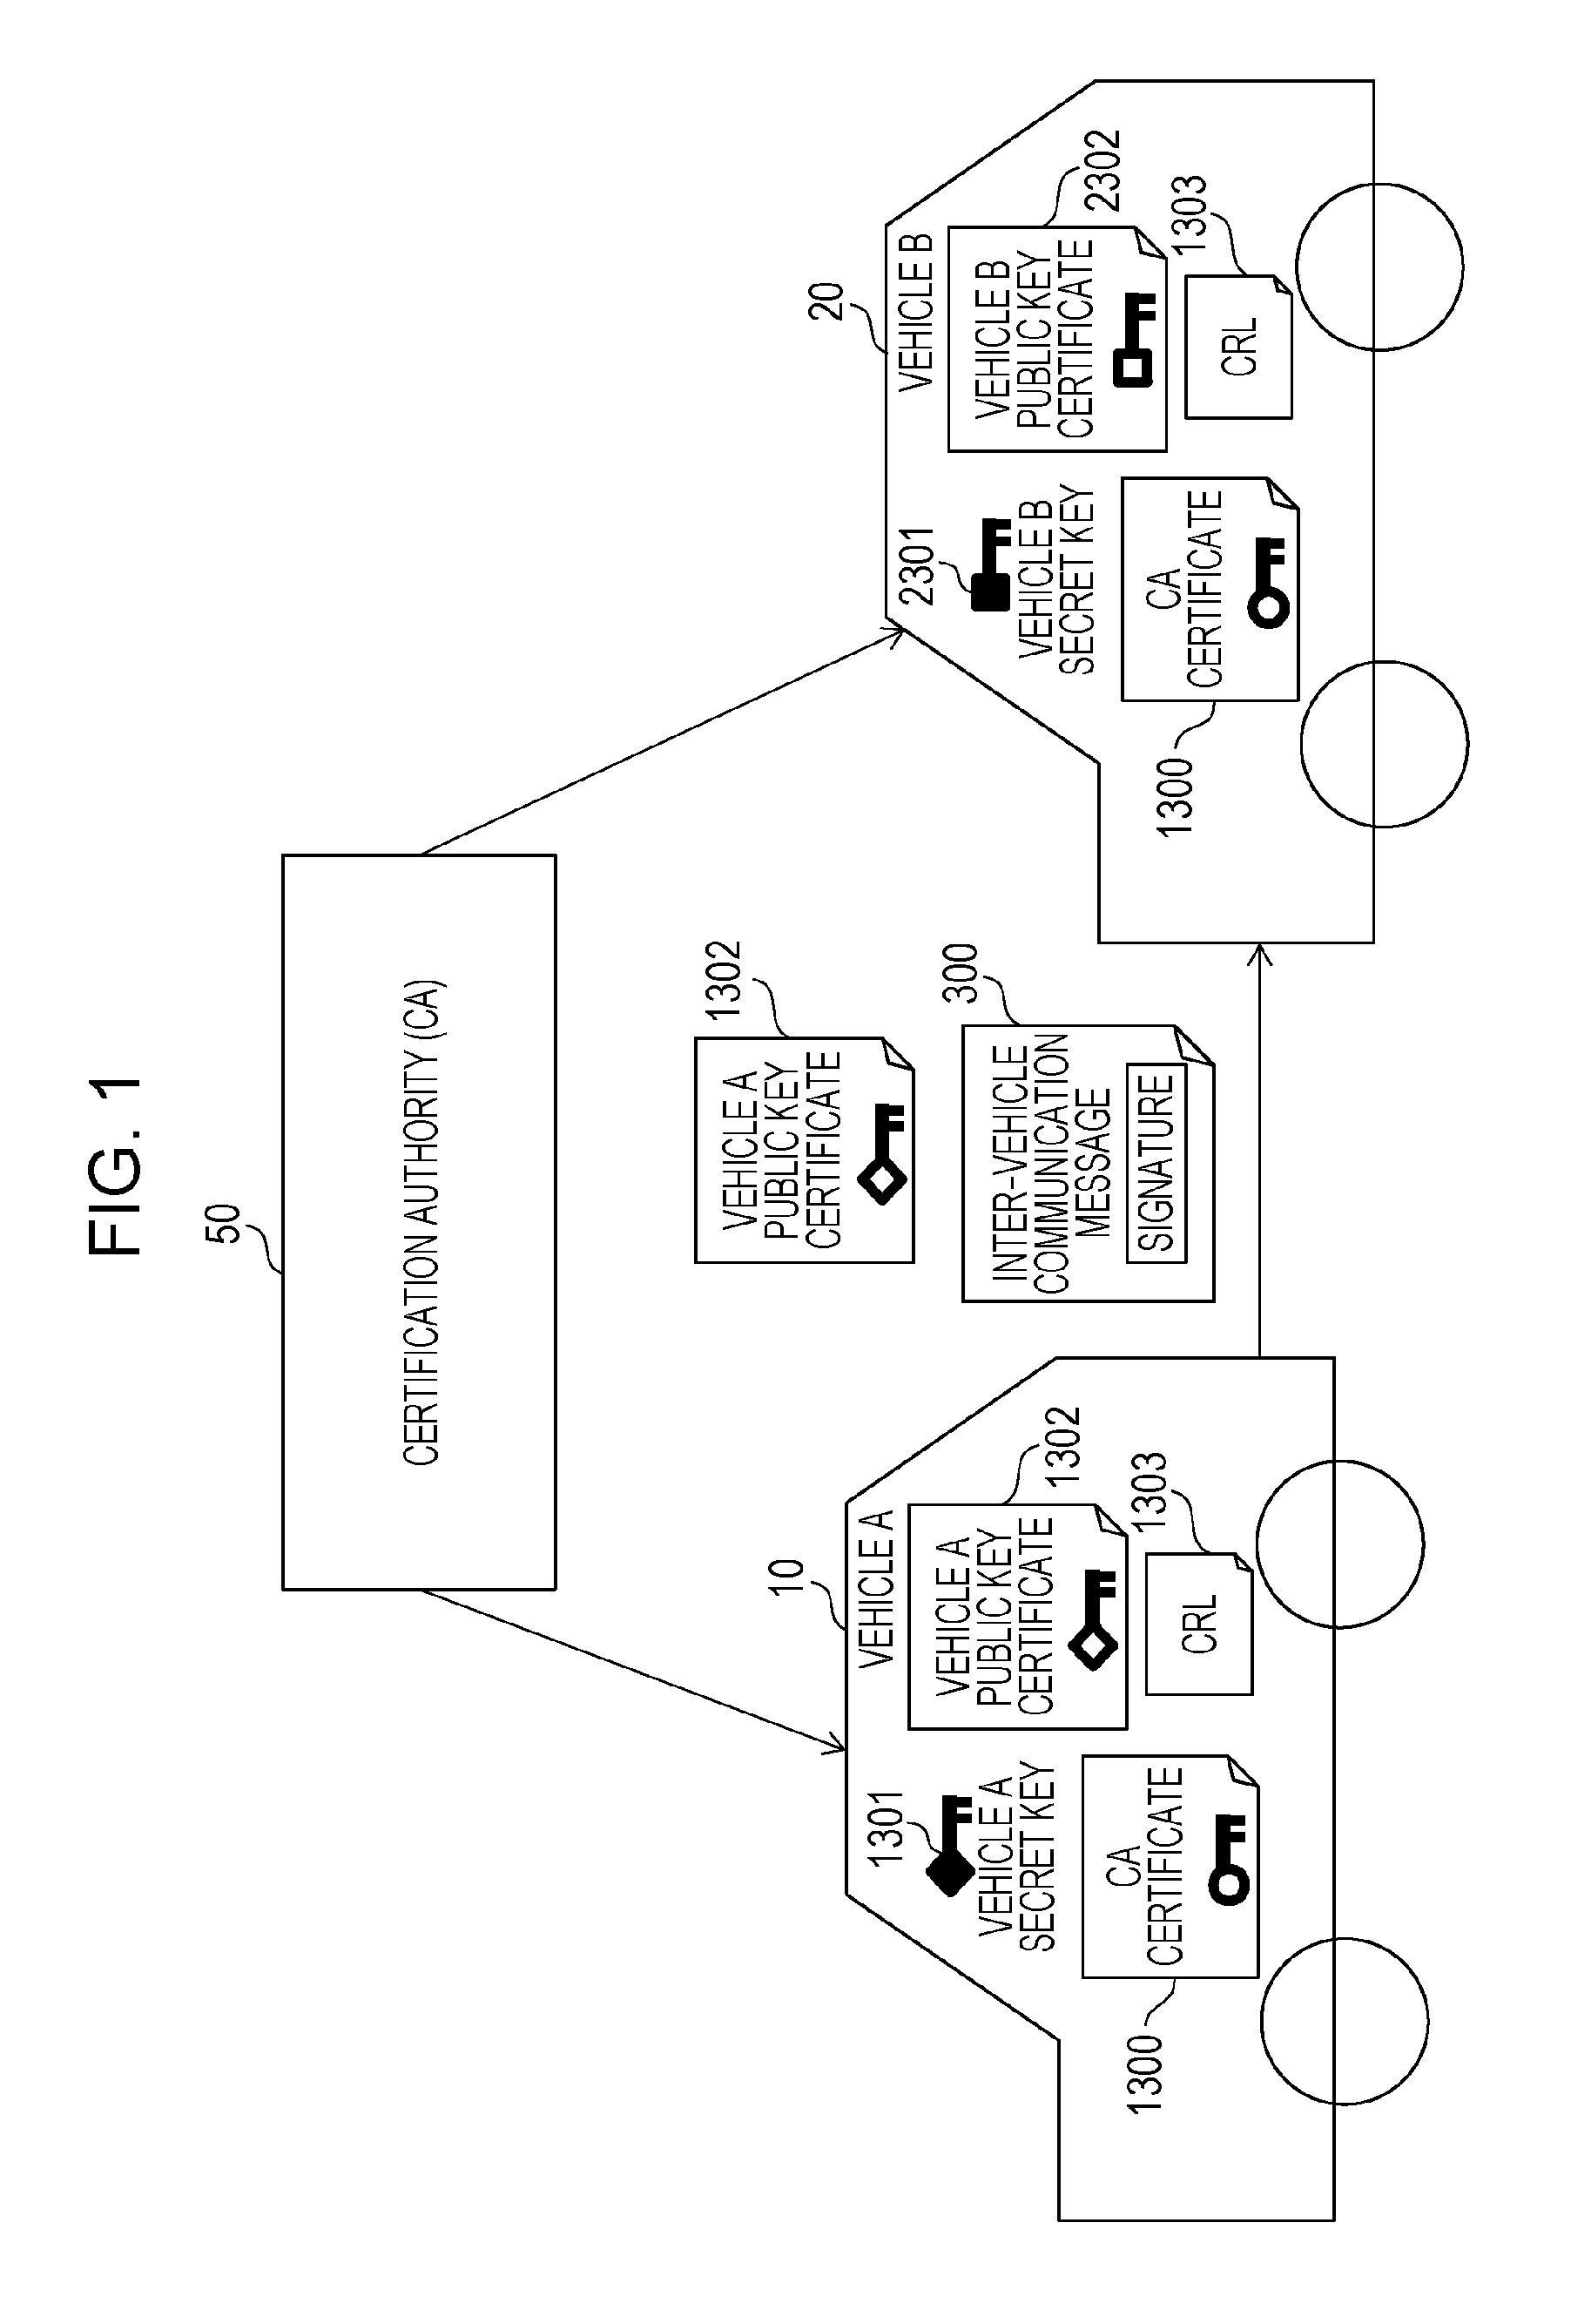 Method for handling case of detecting unauthorized frame transmitted over onboard network